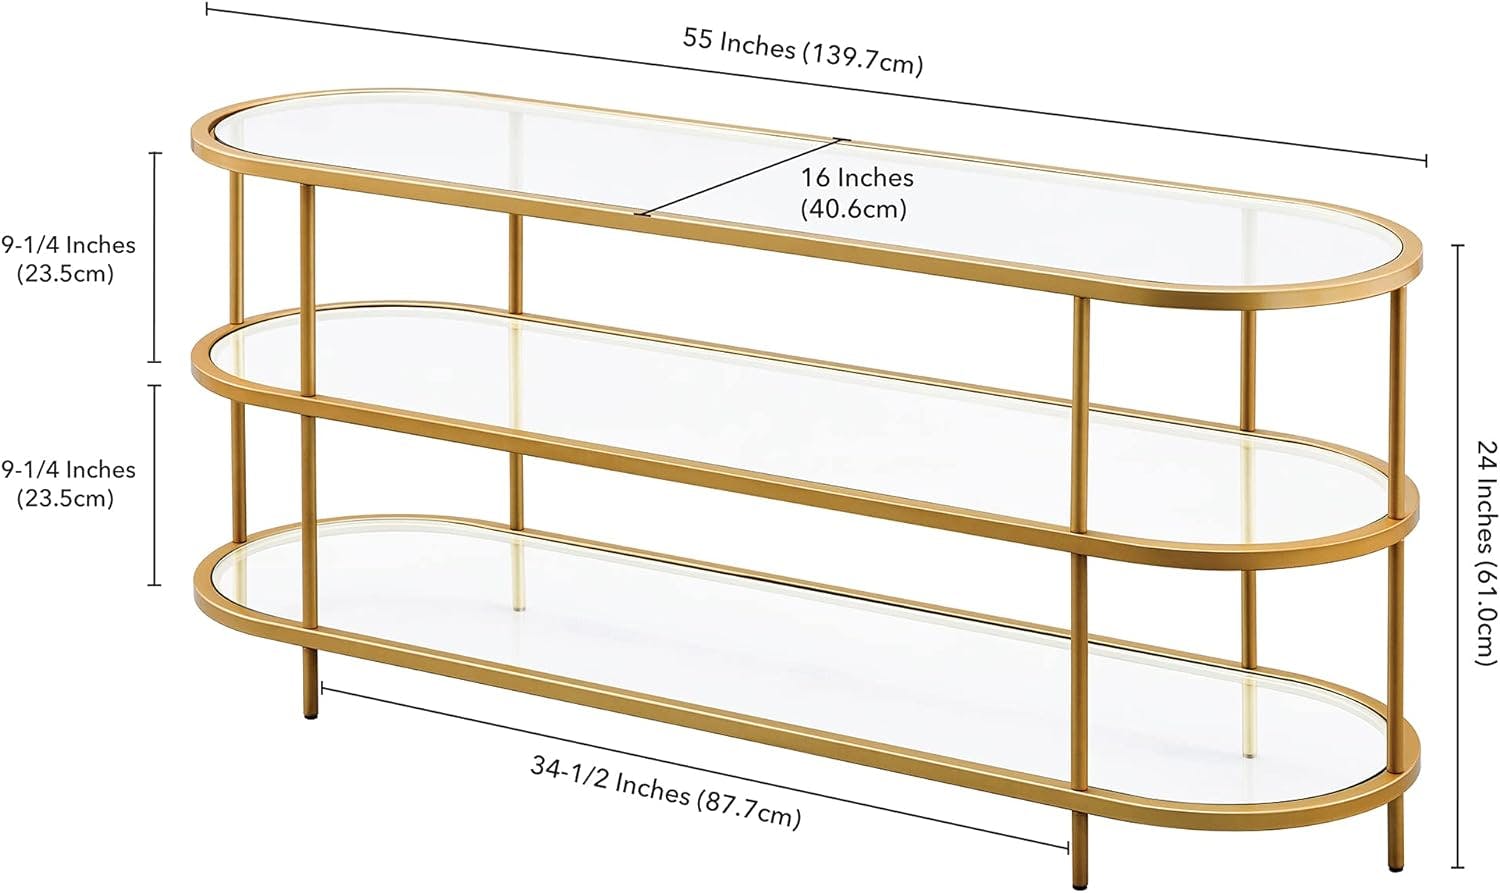 Modern Brass Oval TV Stand with Tempered Glass Shelves